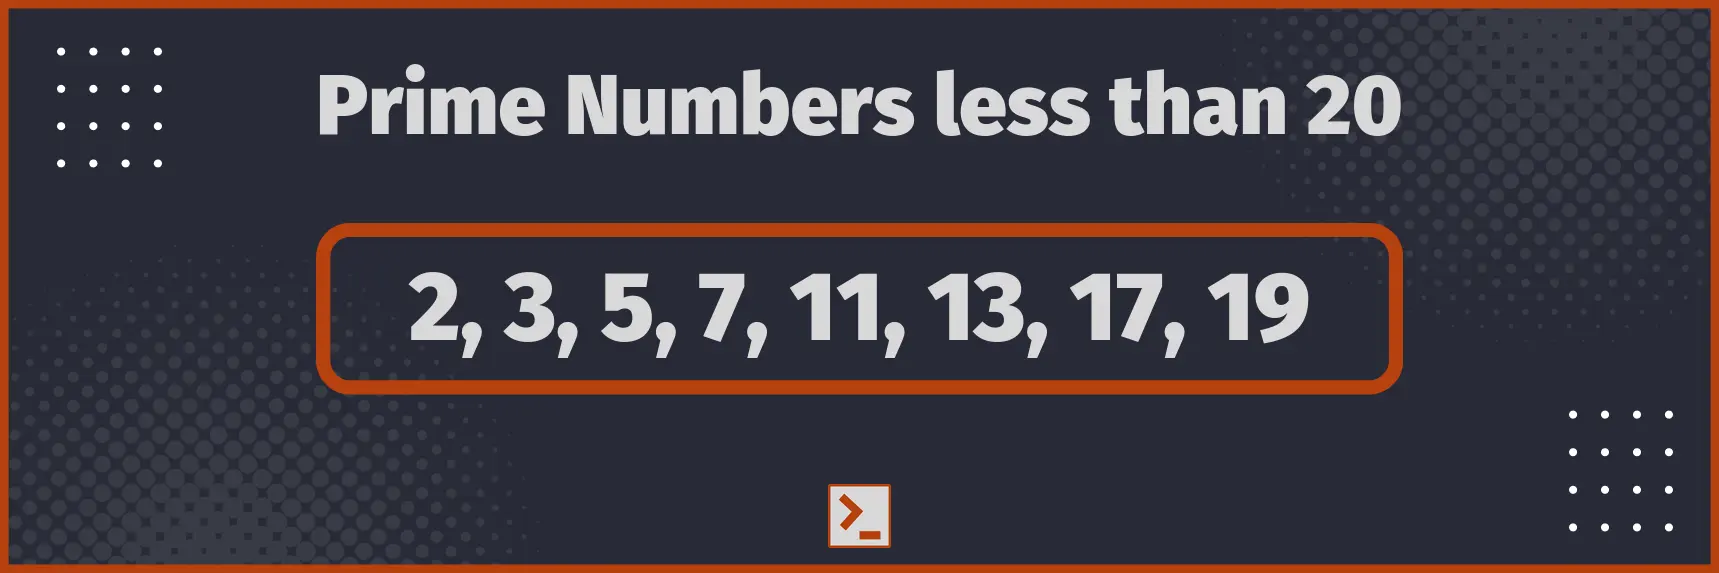 Prime Numbers less than 20